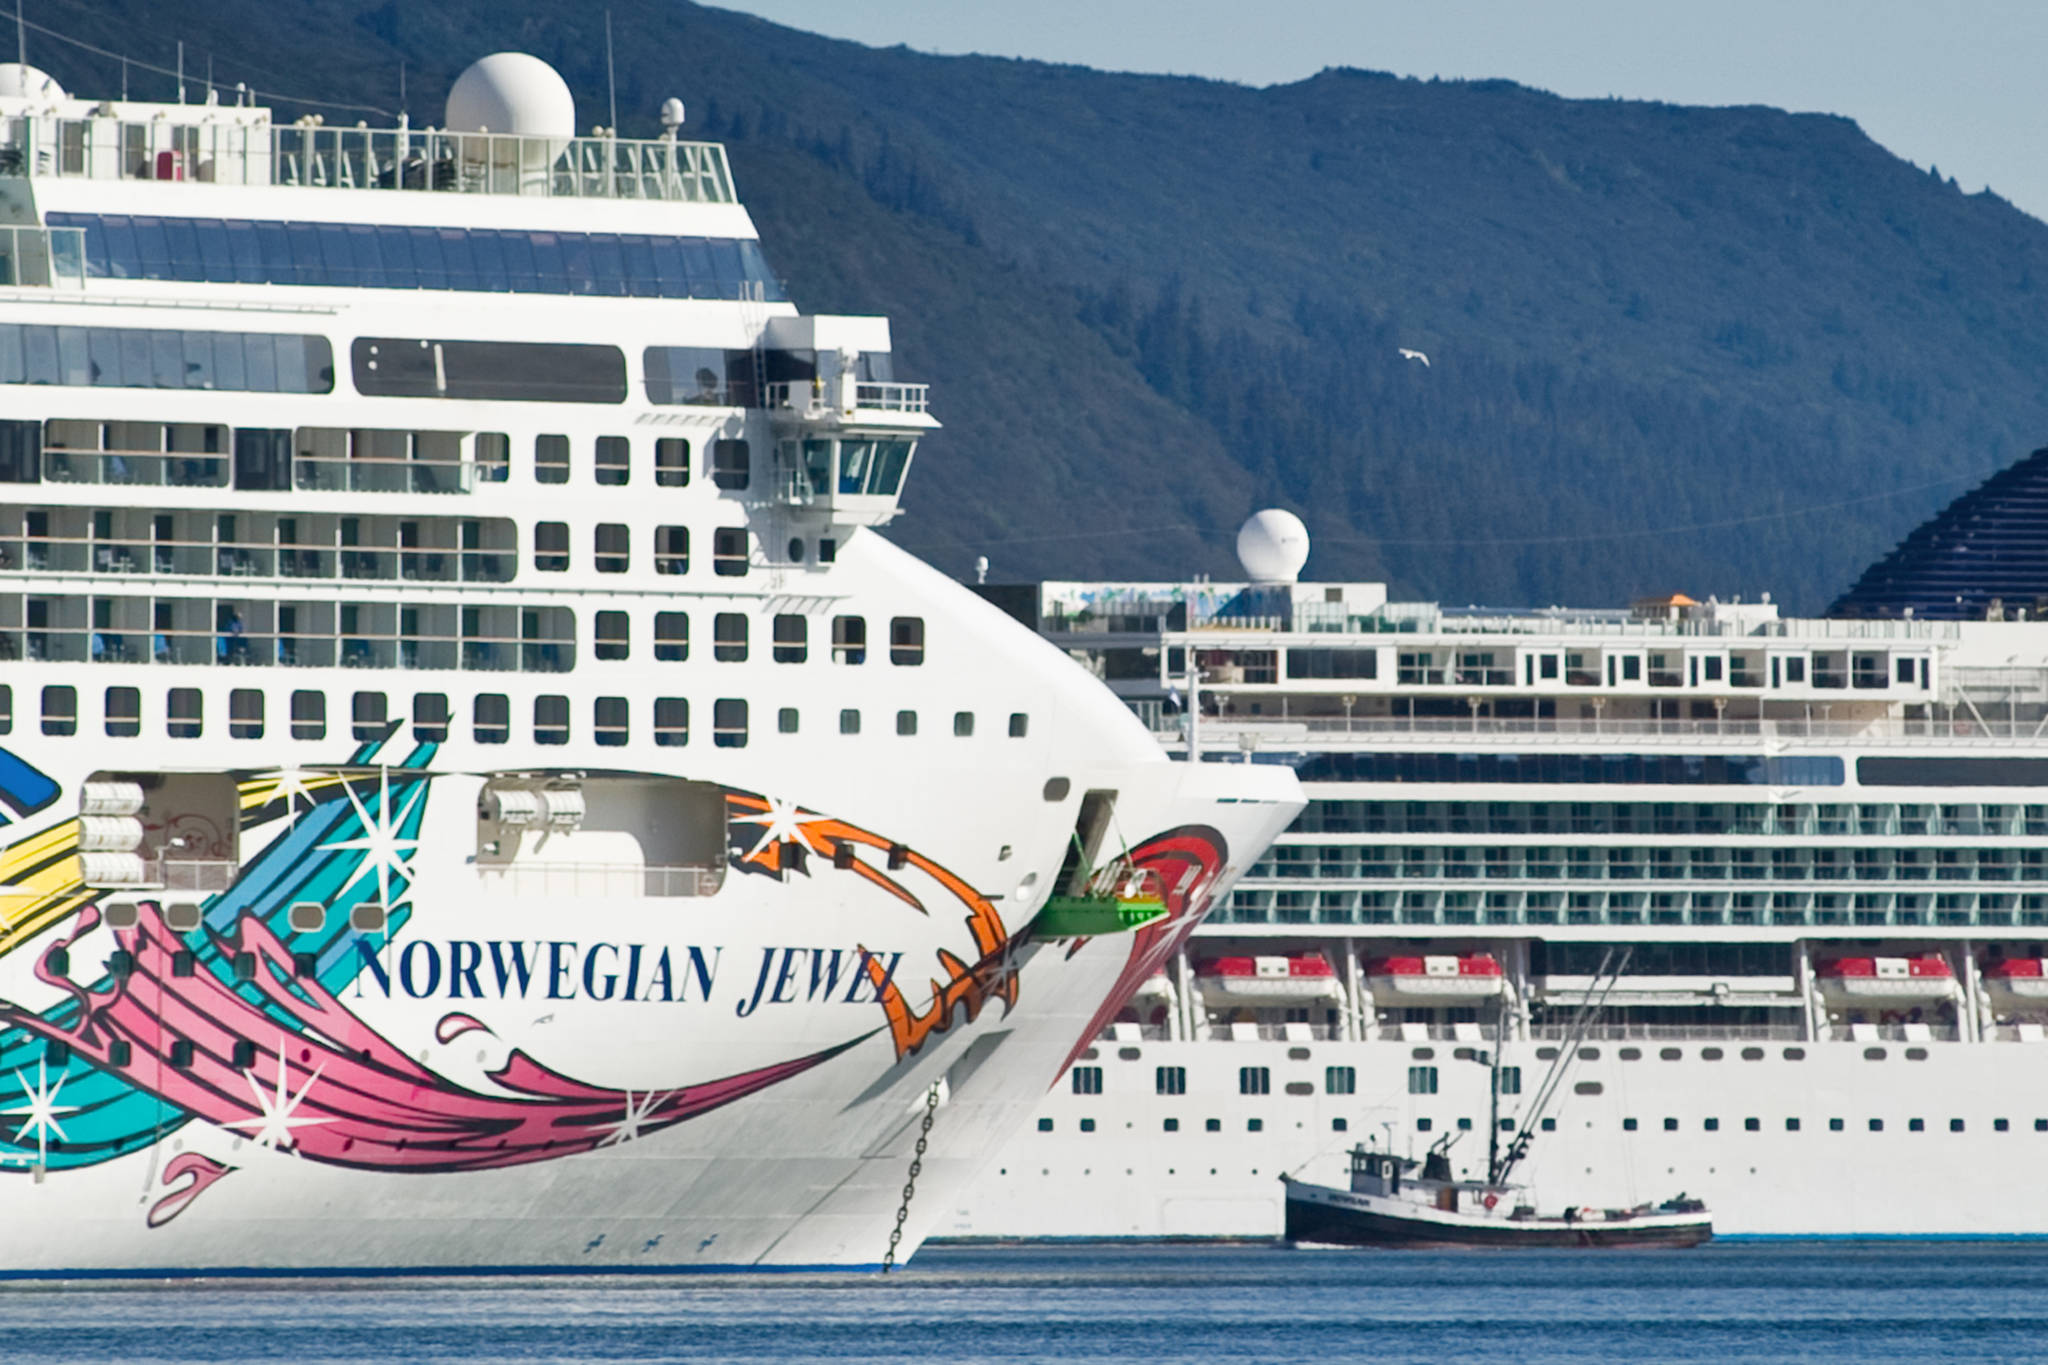 A fishing vessel is drawfed by the Norwegian Cruise Lines' Norwegian Jewel and Norwegian Pearl in Juneau's downtown harbor in September 2014. On Thursday, Canada announced a ban on cruise vessels in Canadian waters through February 2022. (Michael Penn / Juneau Empire File)